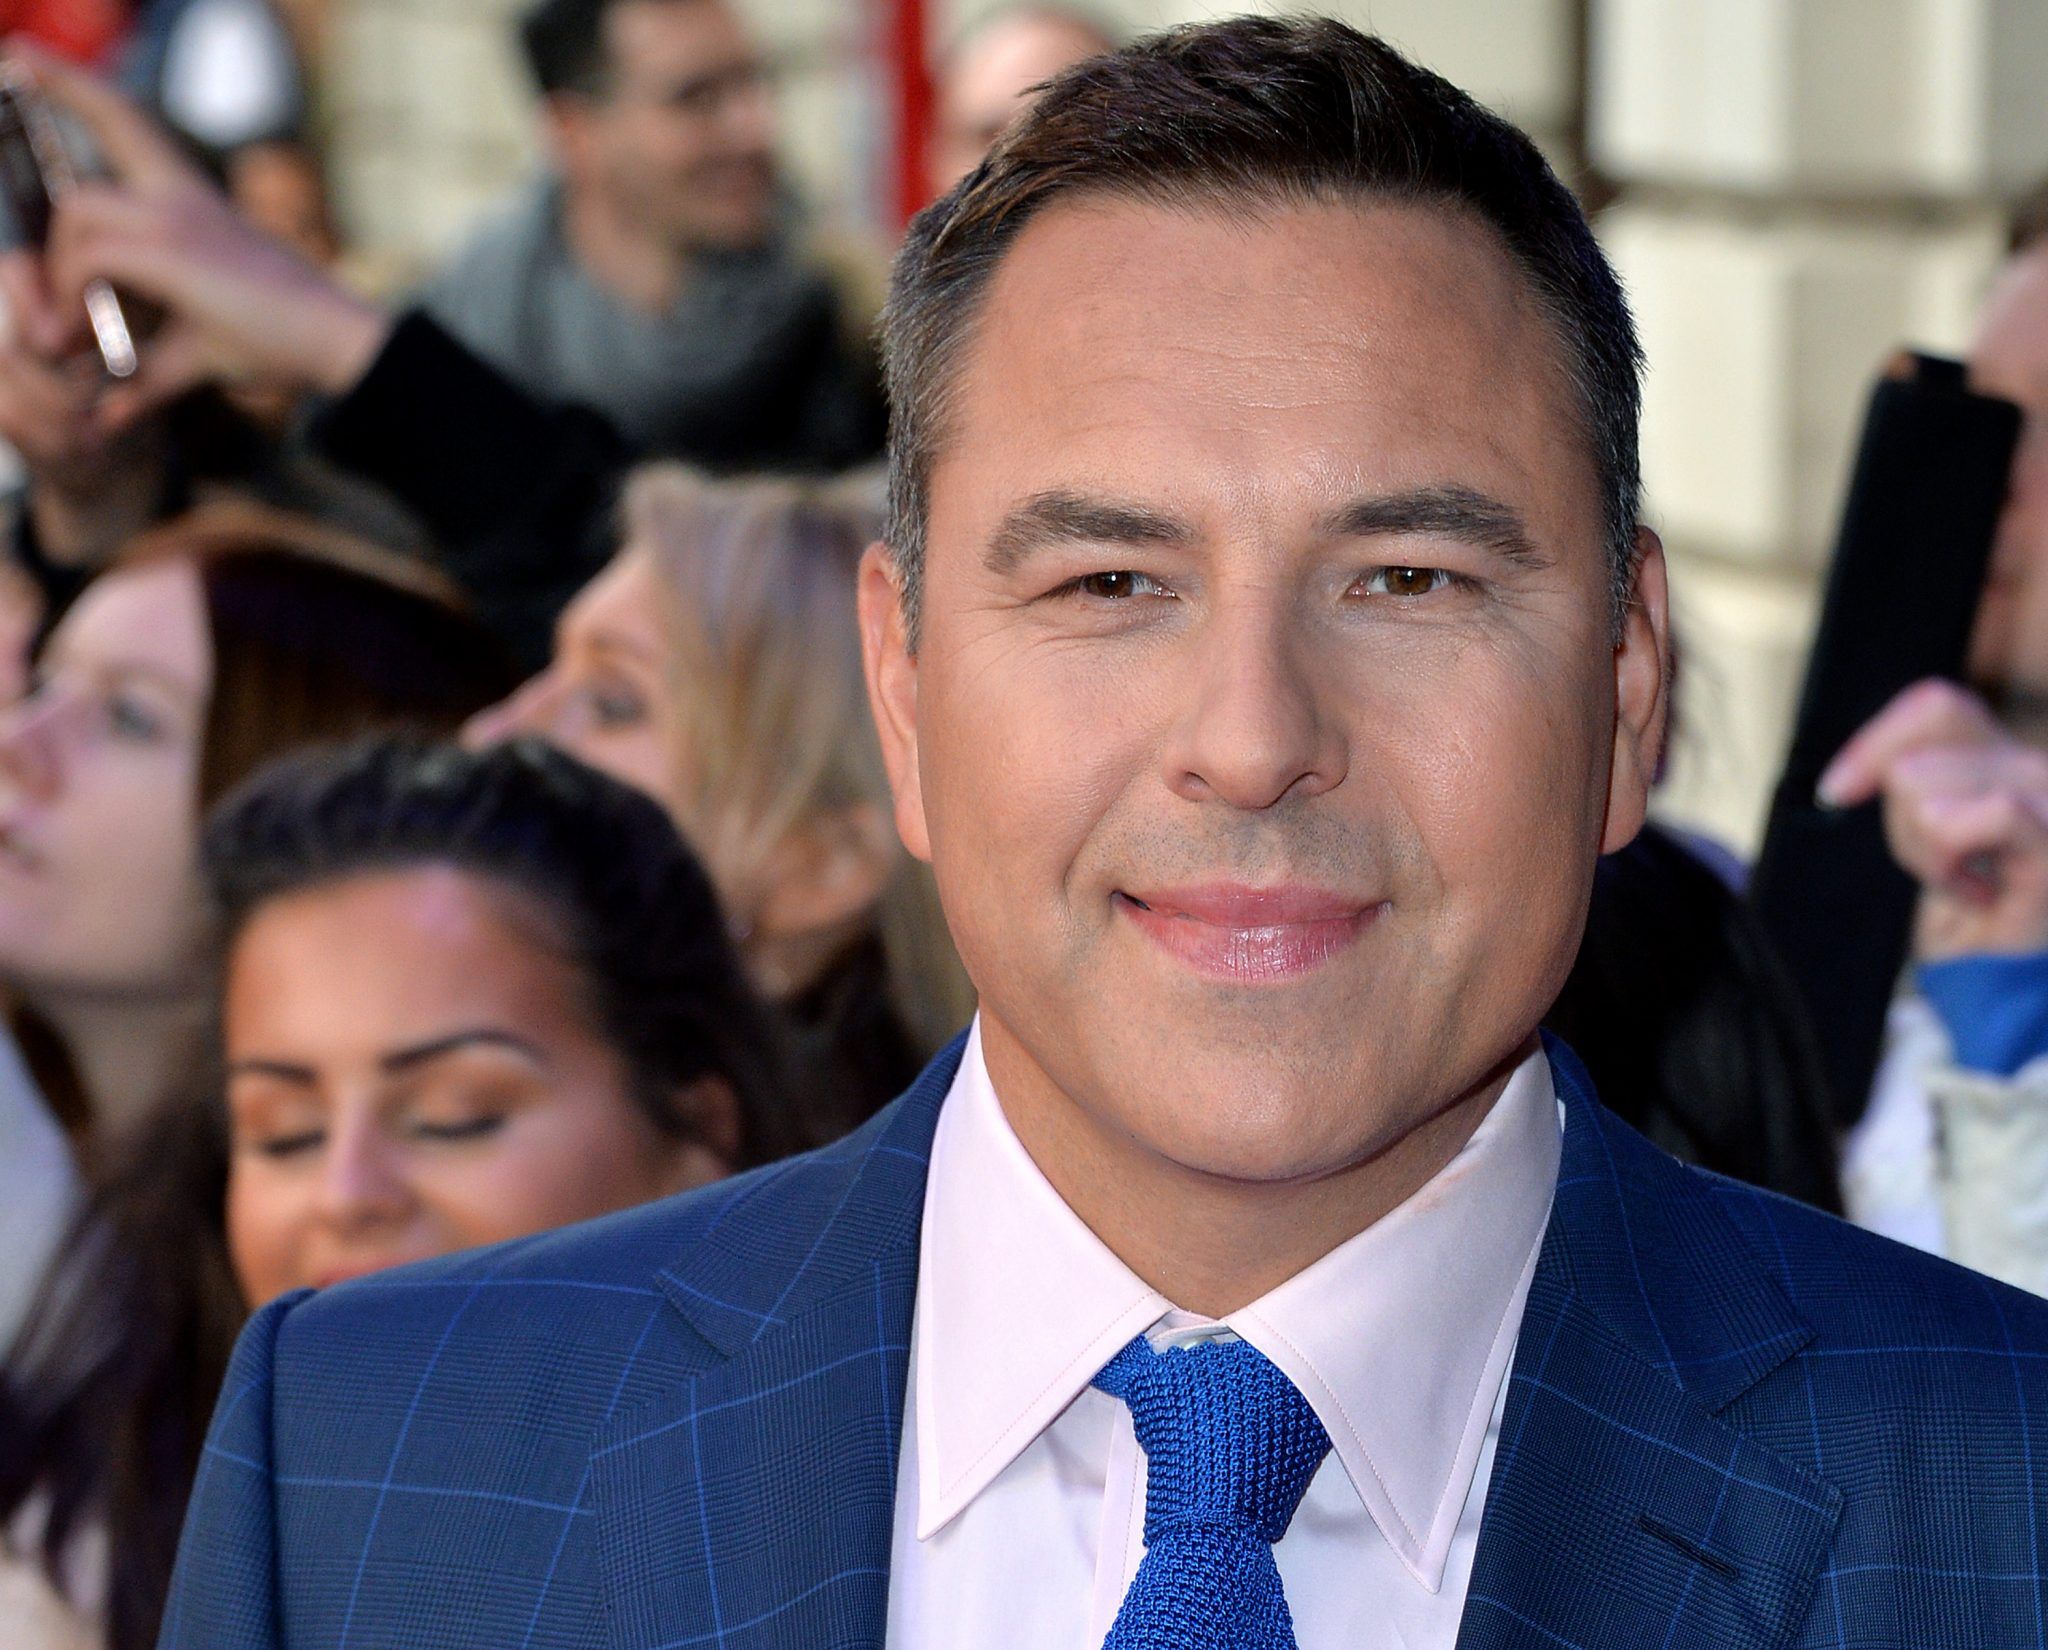 David Walliams recorded making sexually explicit comments about BGT contestant